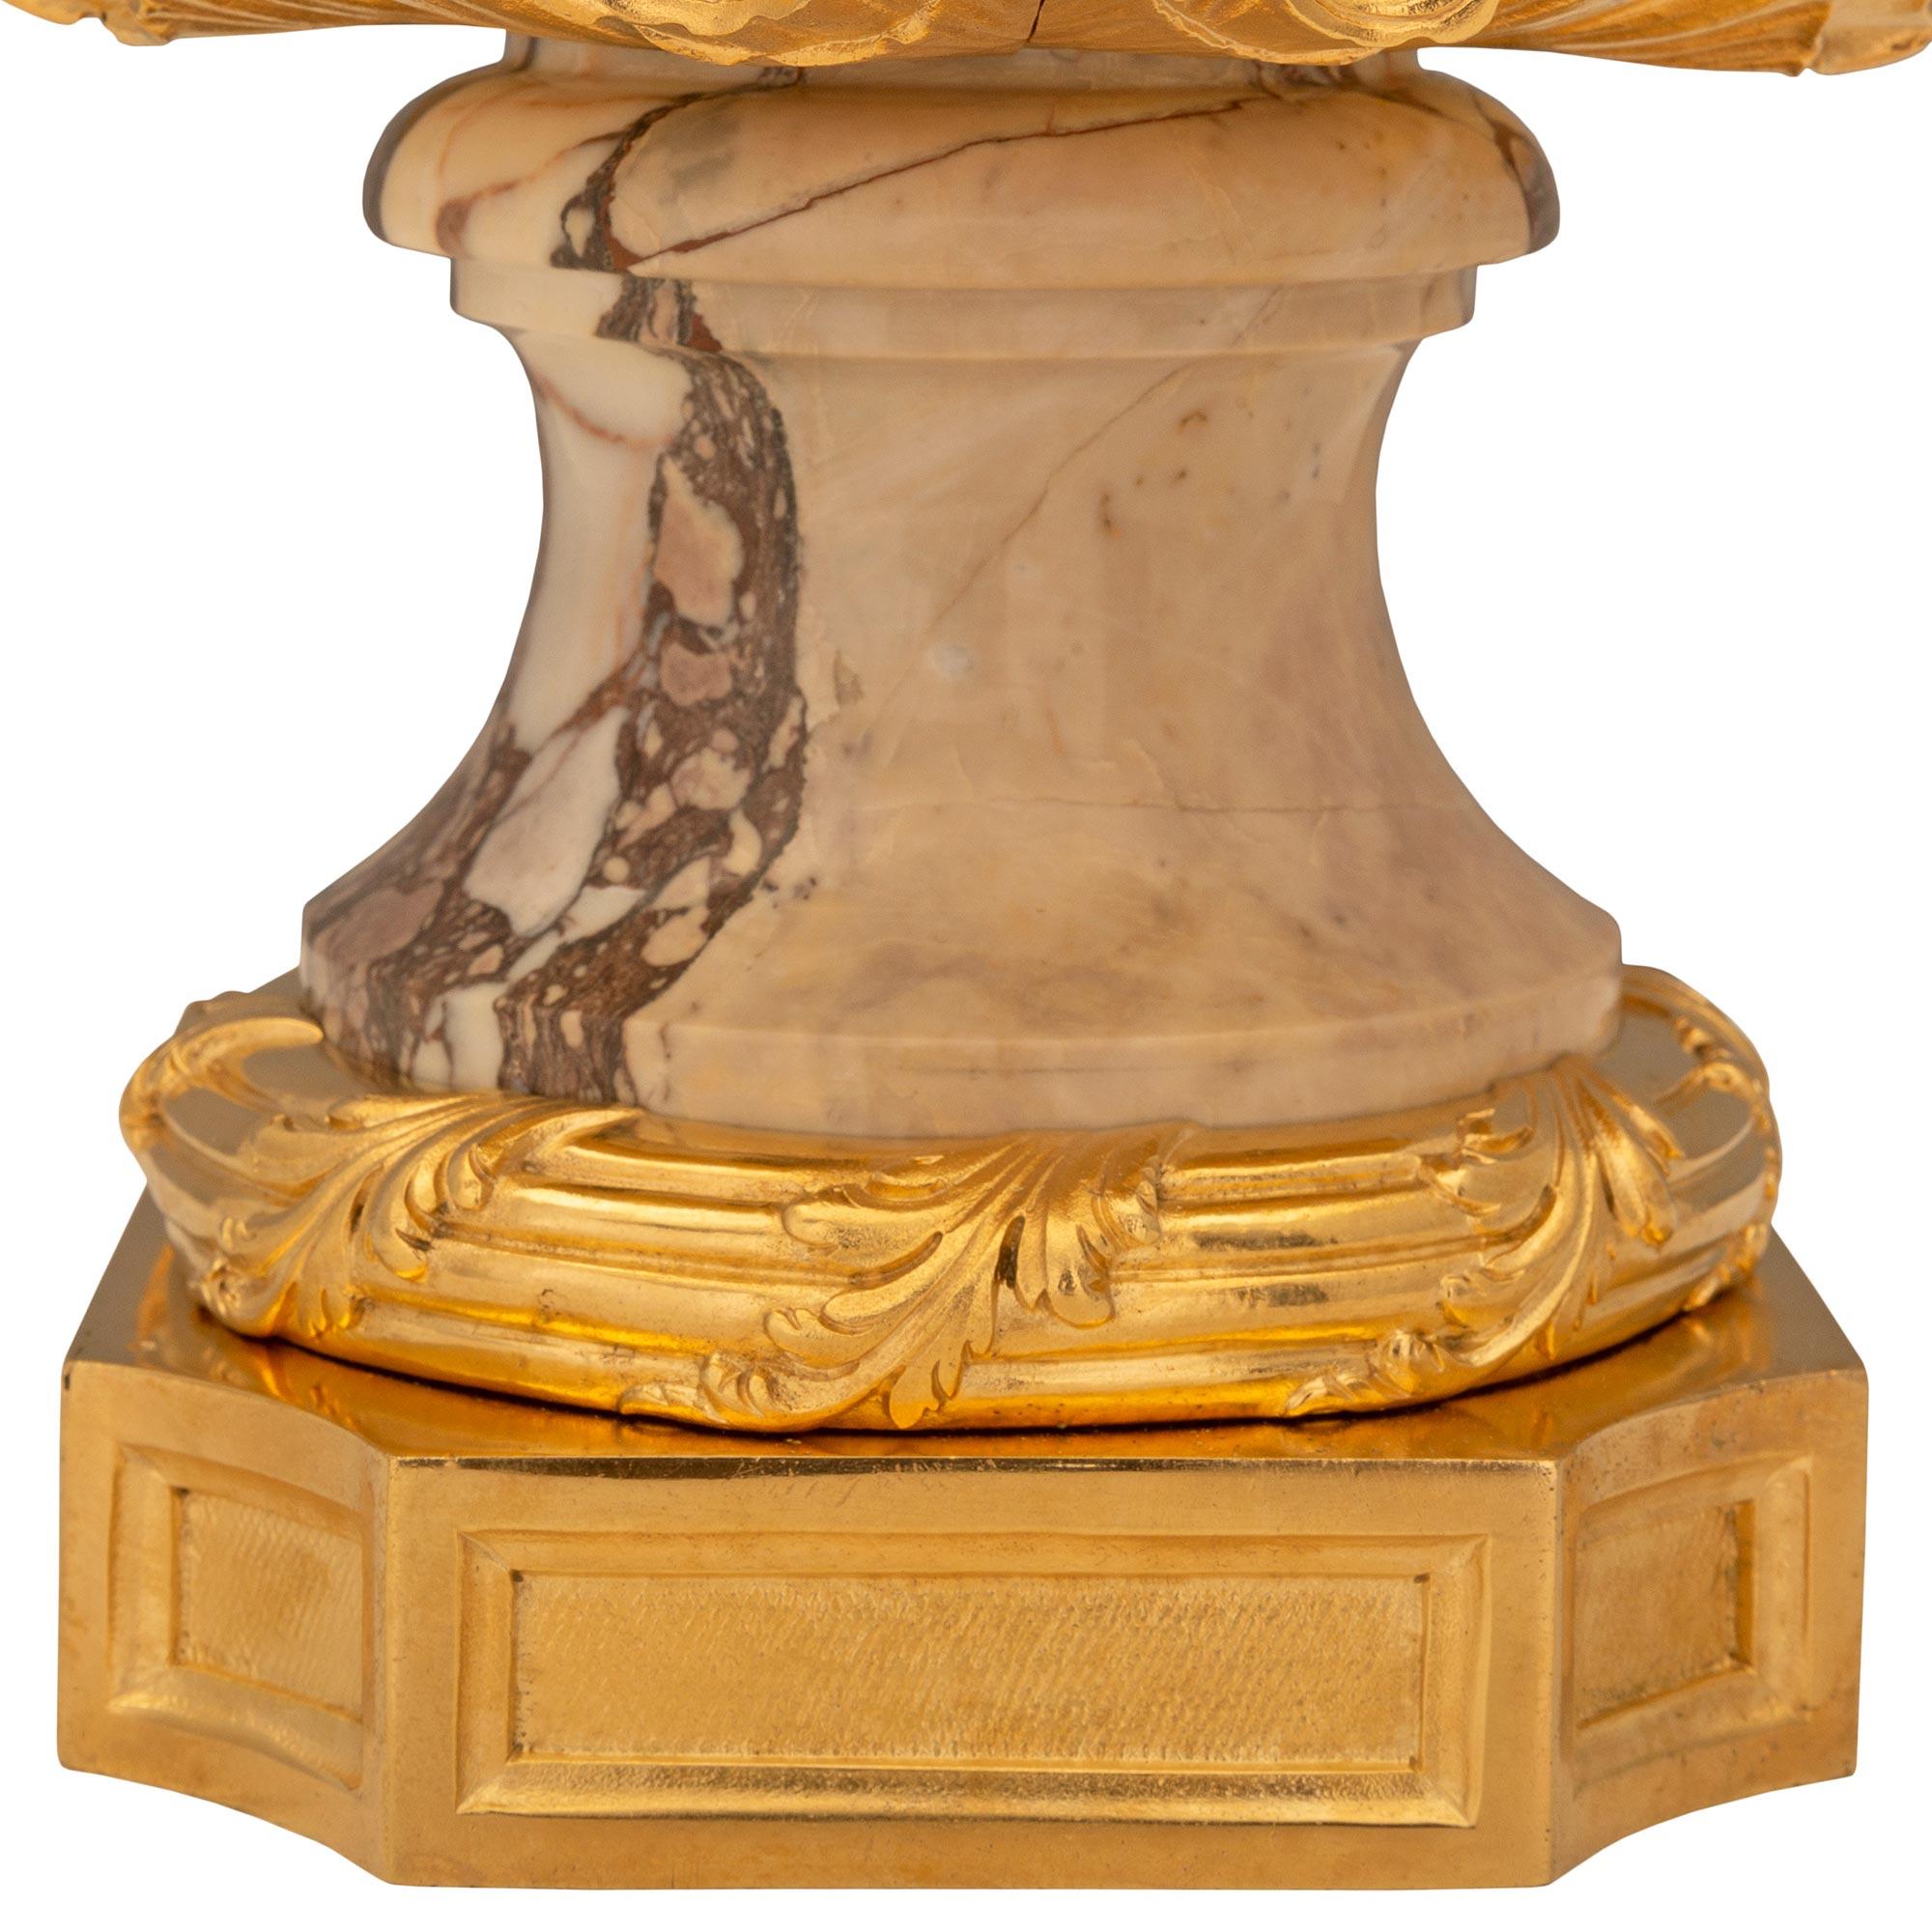 French 19th Century Louis XV St. Brèche Violette Marble and Ormolu Urn For Sale 4